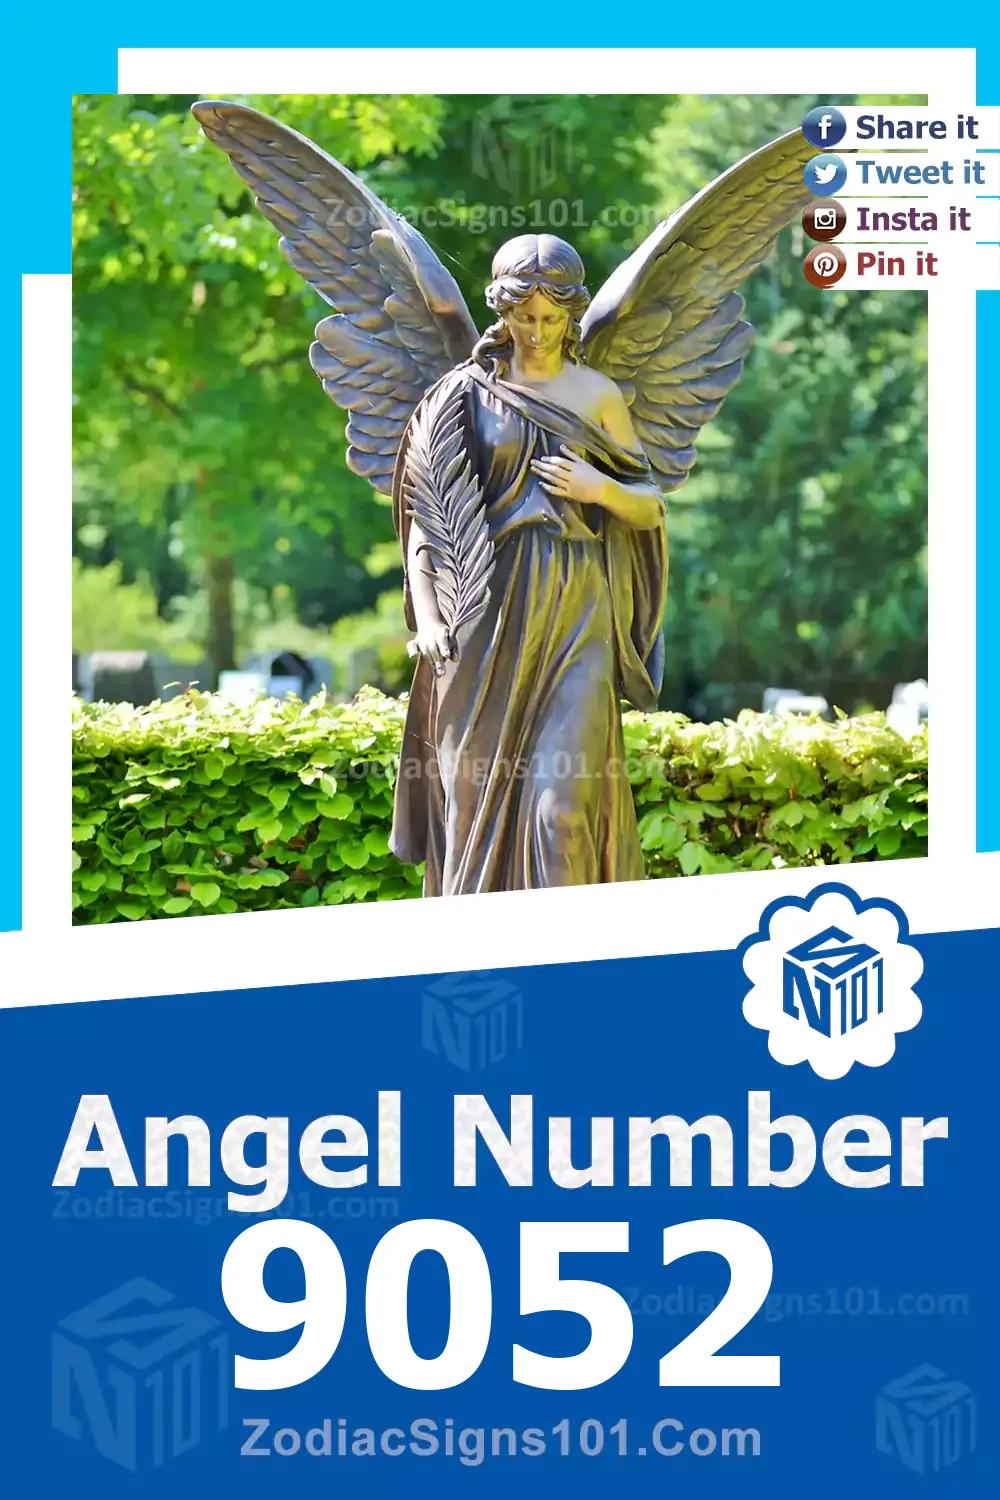 9052 Angel Number Meaning